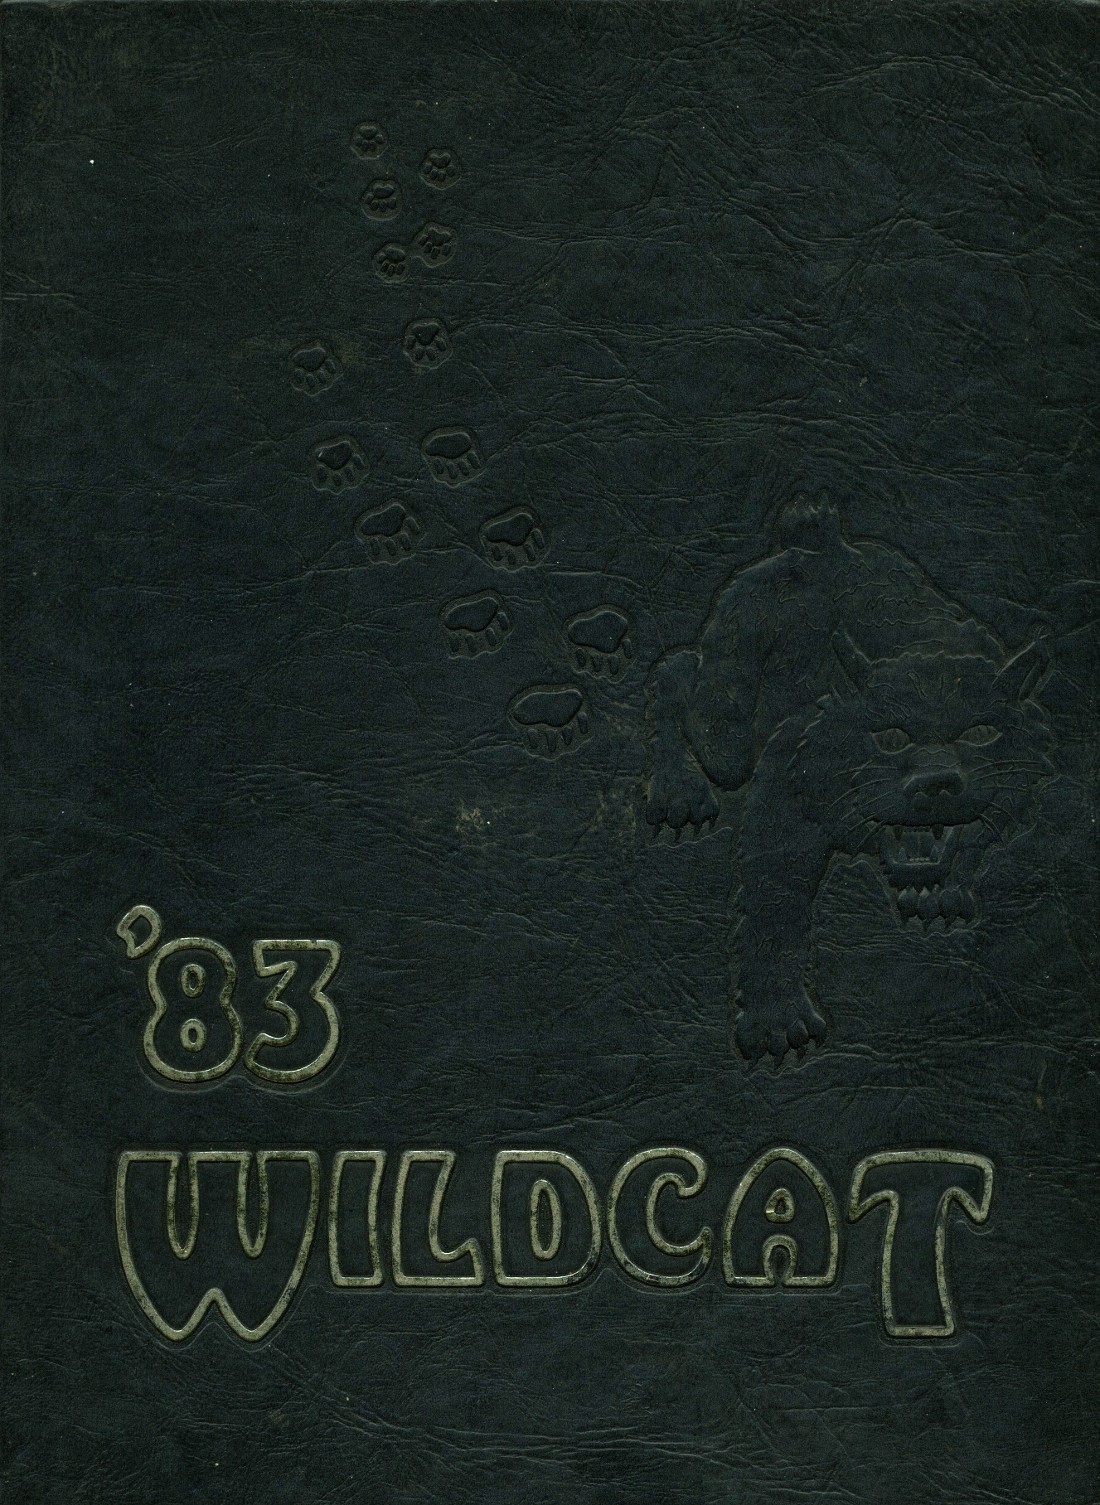 1983 yearbook from Franklin-Simpson High School from Franklin, Kentucky ...